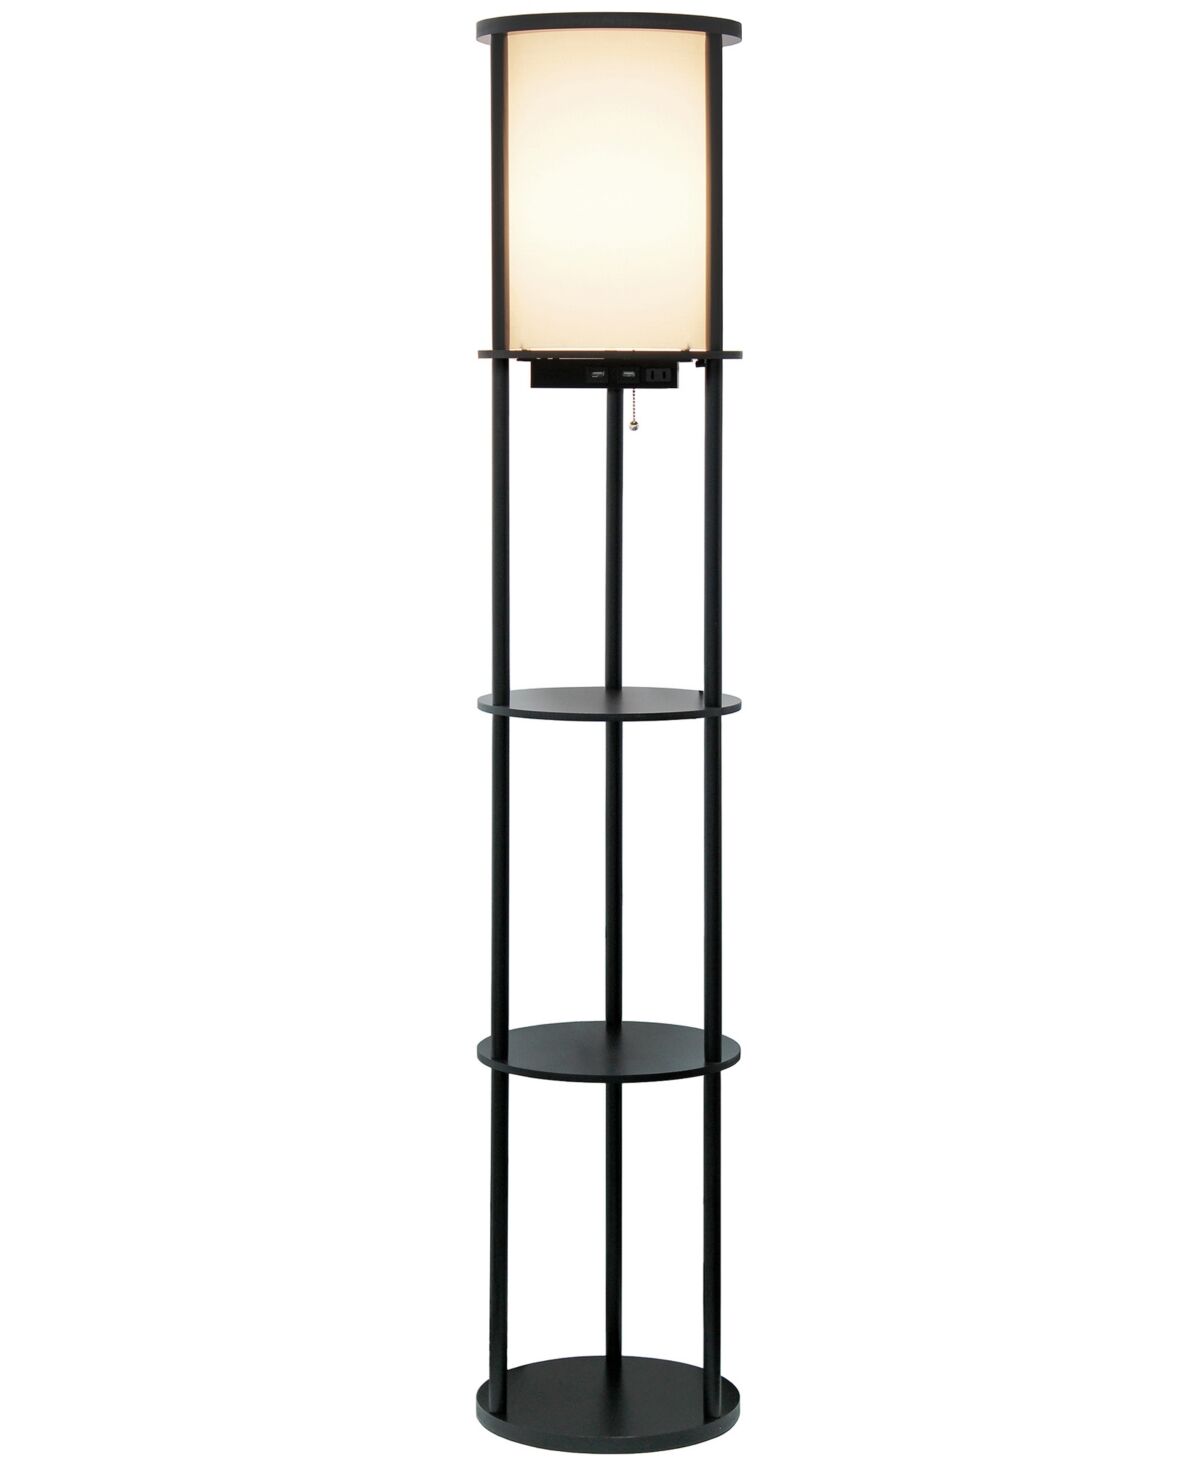 All The Rages Etagere Organizer Storage Floor Lamp with 2 Usb Charging Ports, 1 Charging Outlet - Black